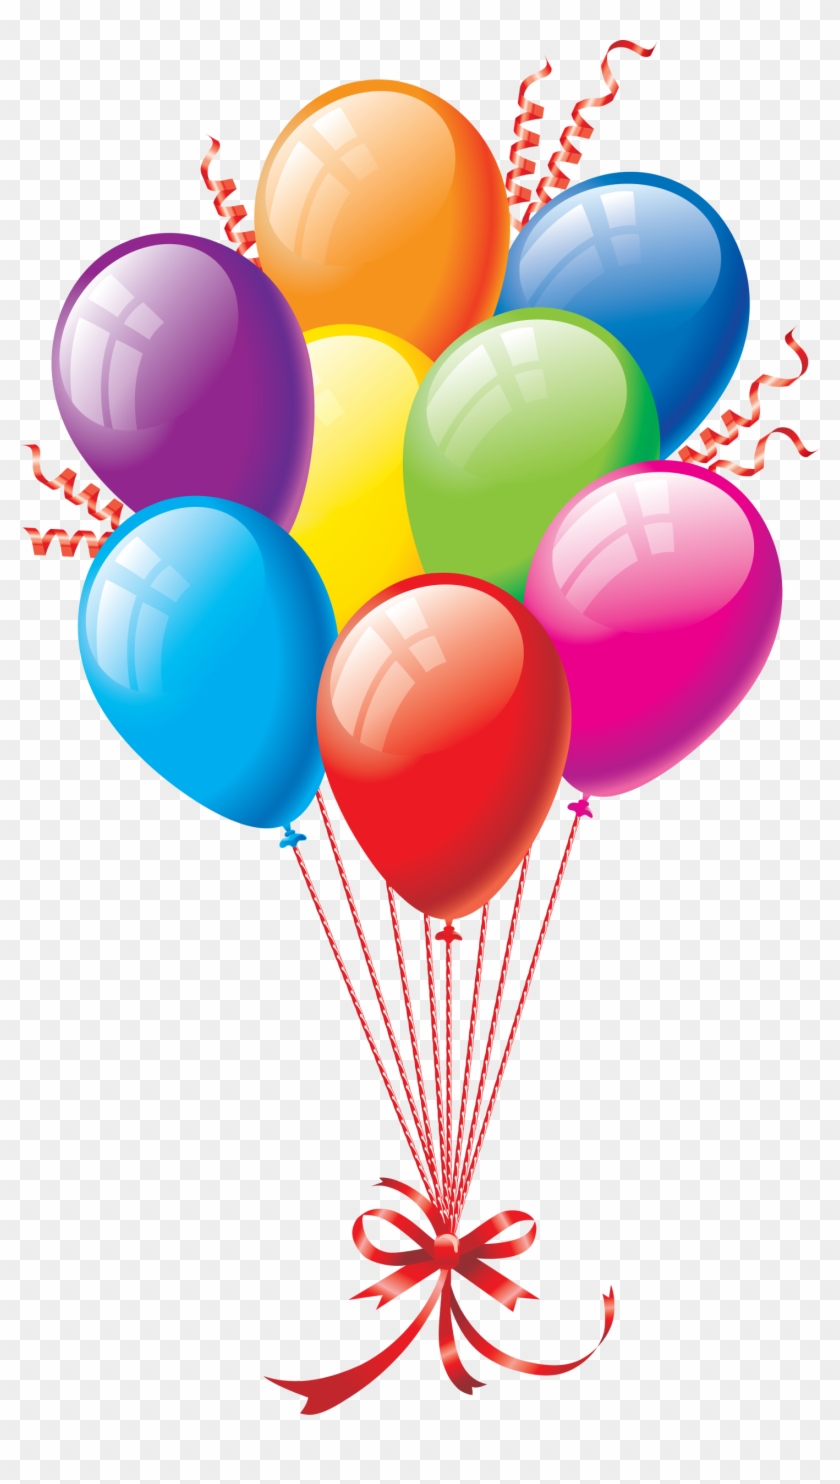 Birthday Balloons Png - Transparent Transparent Background Balloons Png Clipart #389974